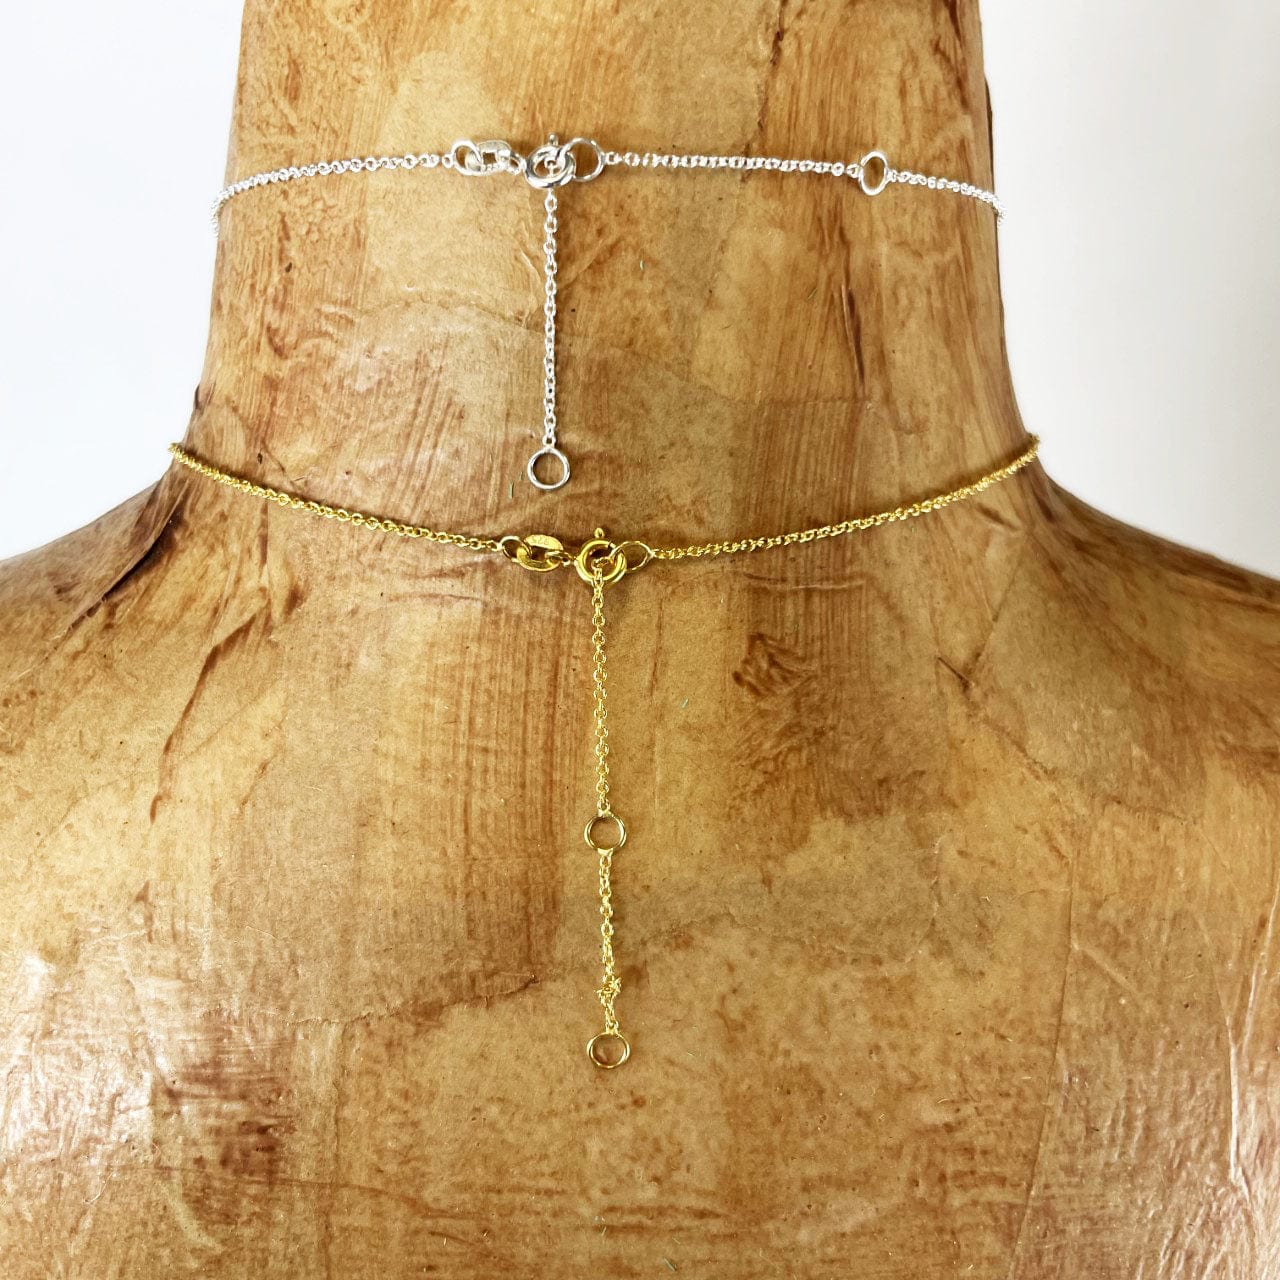 necklaces from back showing clasp closure